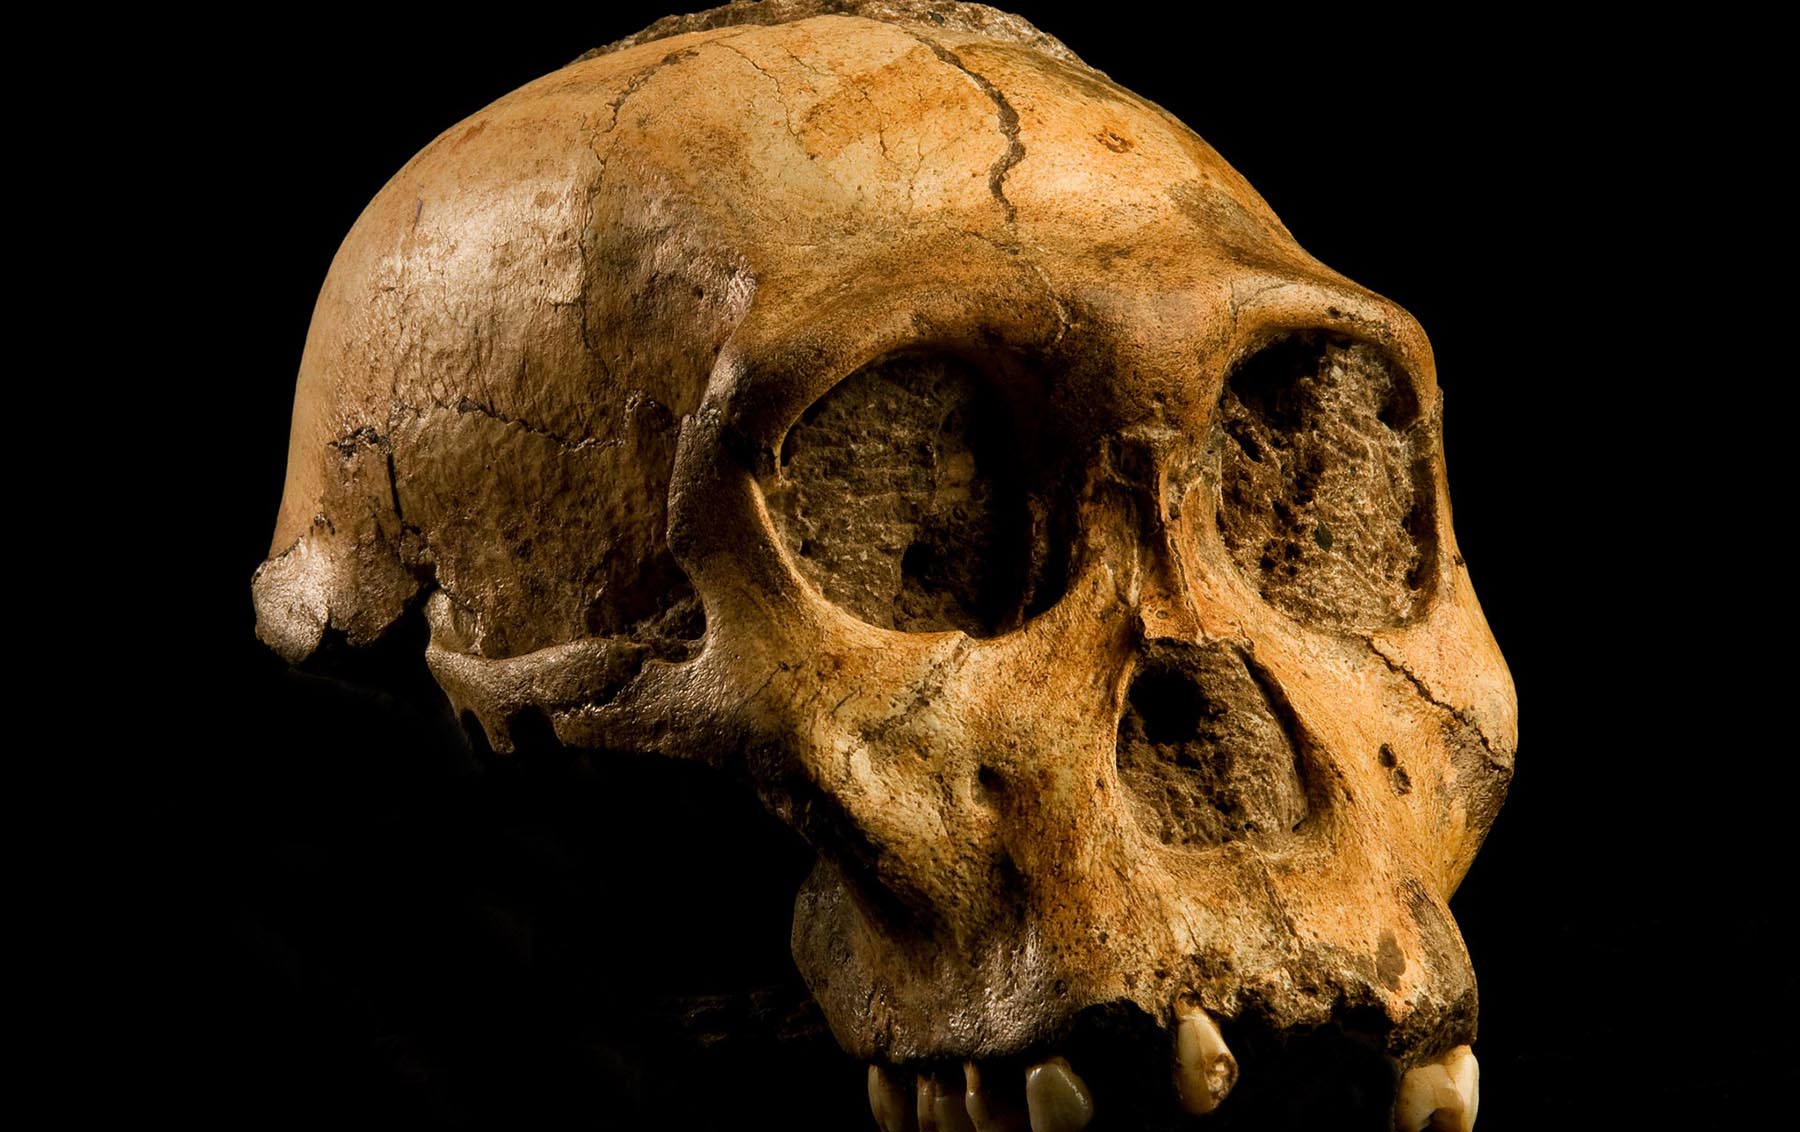 The skull of a Australopithecus sediba, a species of Australopithecines, who were our ancestors and whose brains started to grow two to three million years ago. Image credit - Australopithecus sediba by Brett Eloff, courtesy Profberger and Wits University is licensed under CC BY-SA 4.0